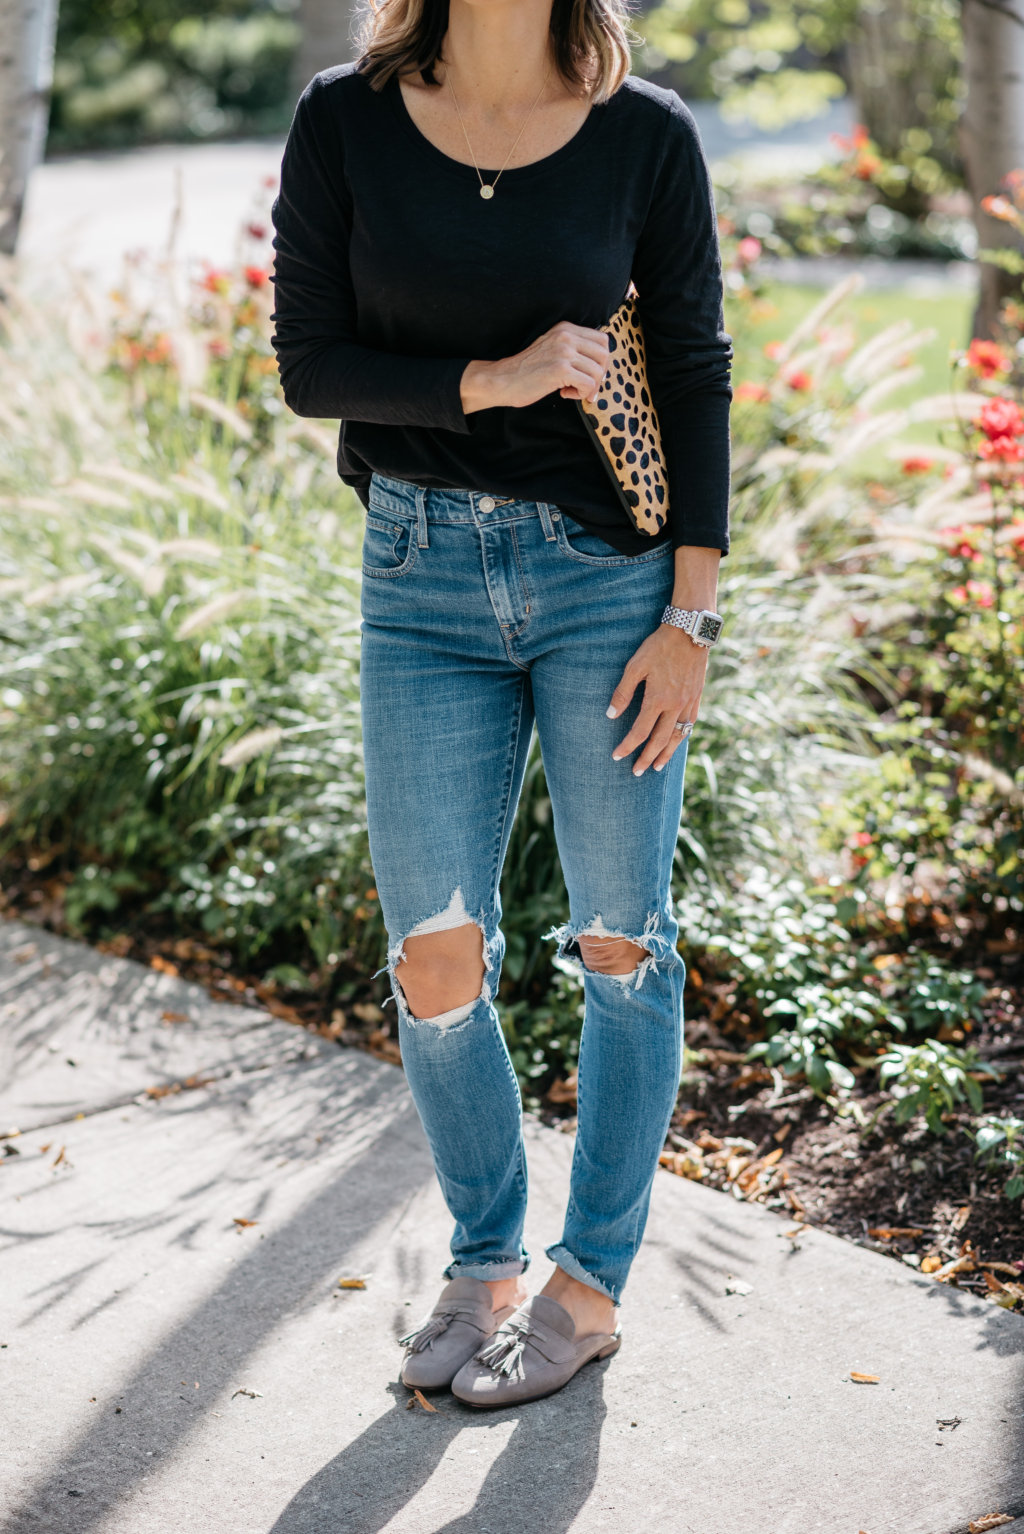 Black long sleeve tee, mom jeans, mules, and clutch